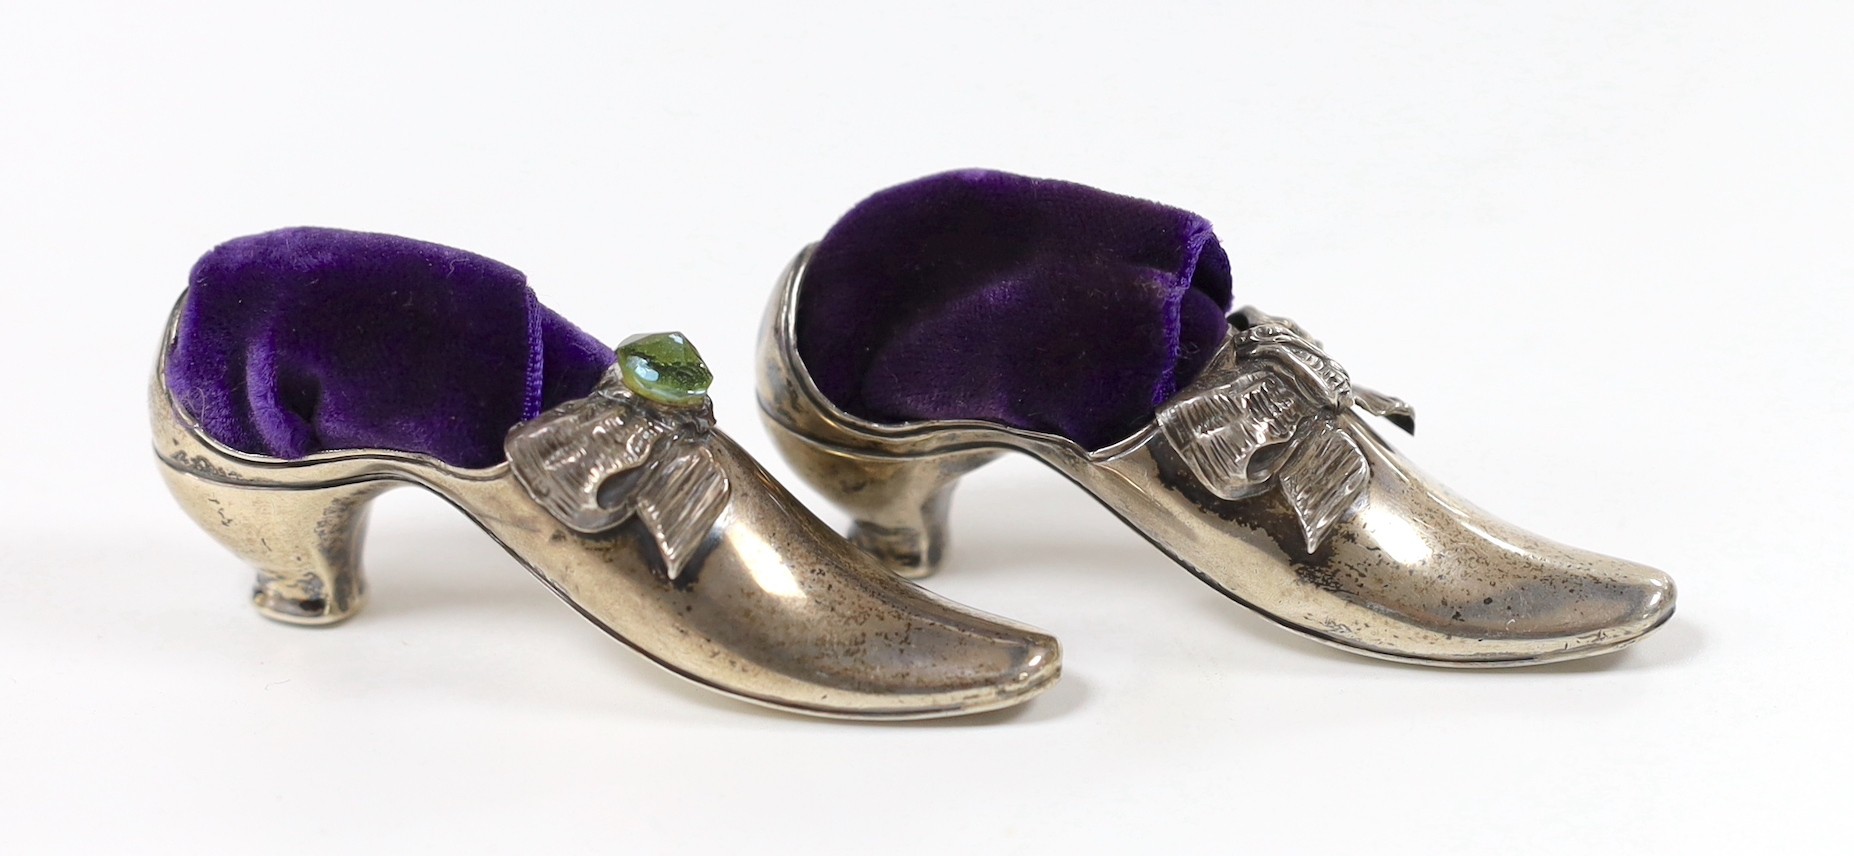 Two similar late Victorian novelty silver mounted pin cushions, modelled as shoes, one set with later green stone, Adie & Lovekin, Birmingham, 1890, length 83mm (later cushions).